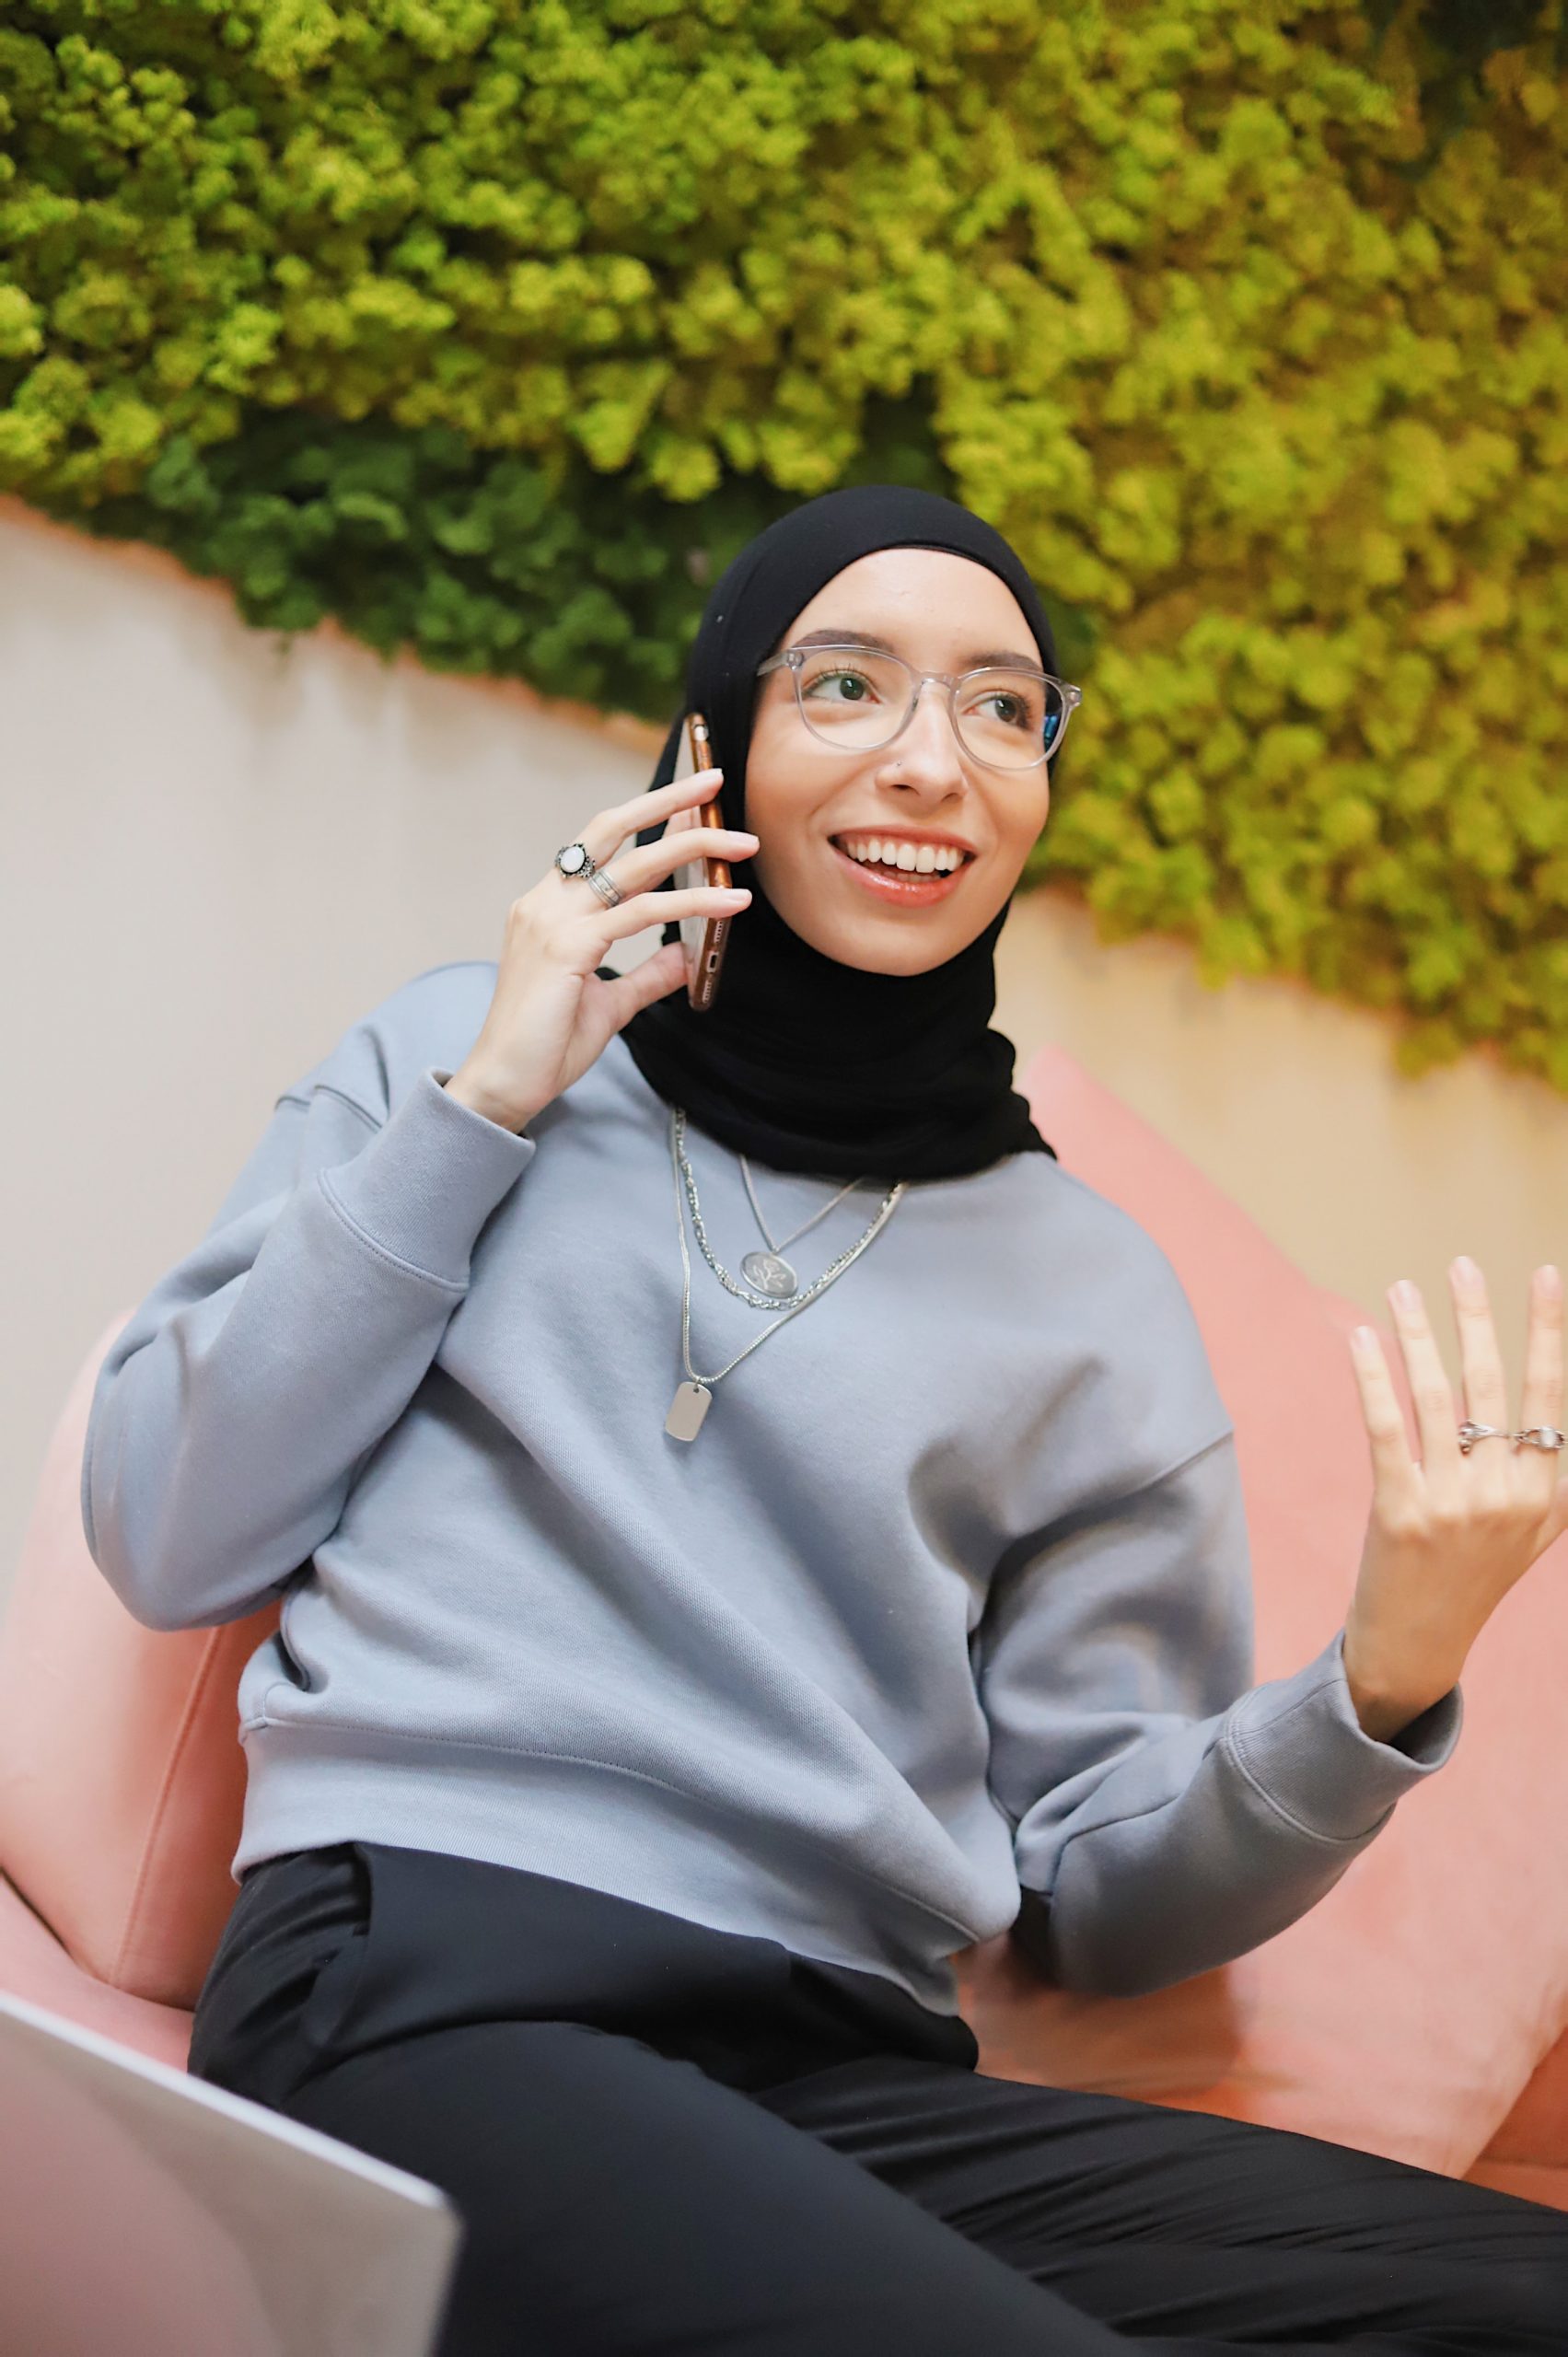 Woman wearing a black hijab and a gray sweatshirt sits in a pink chair talking on the phone.